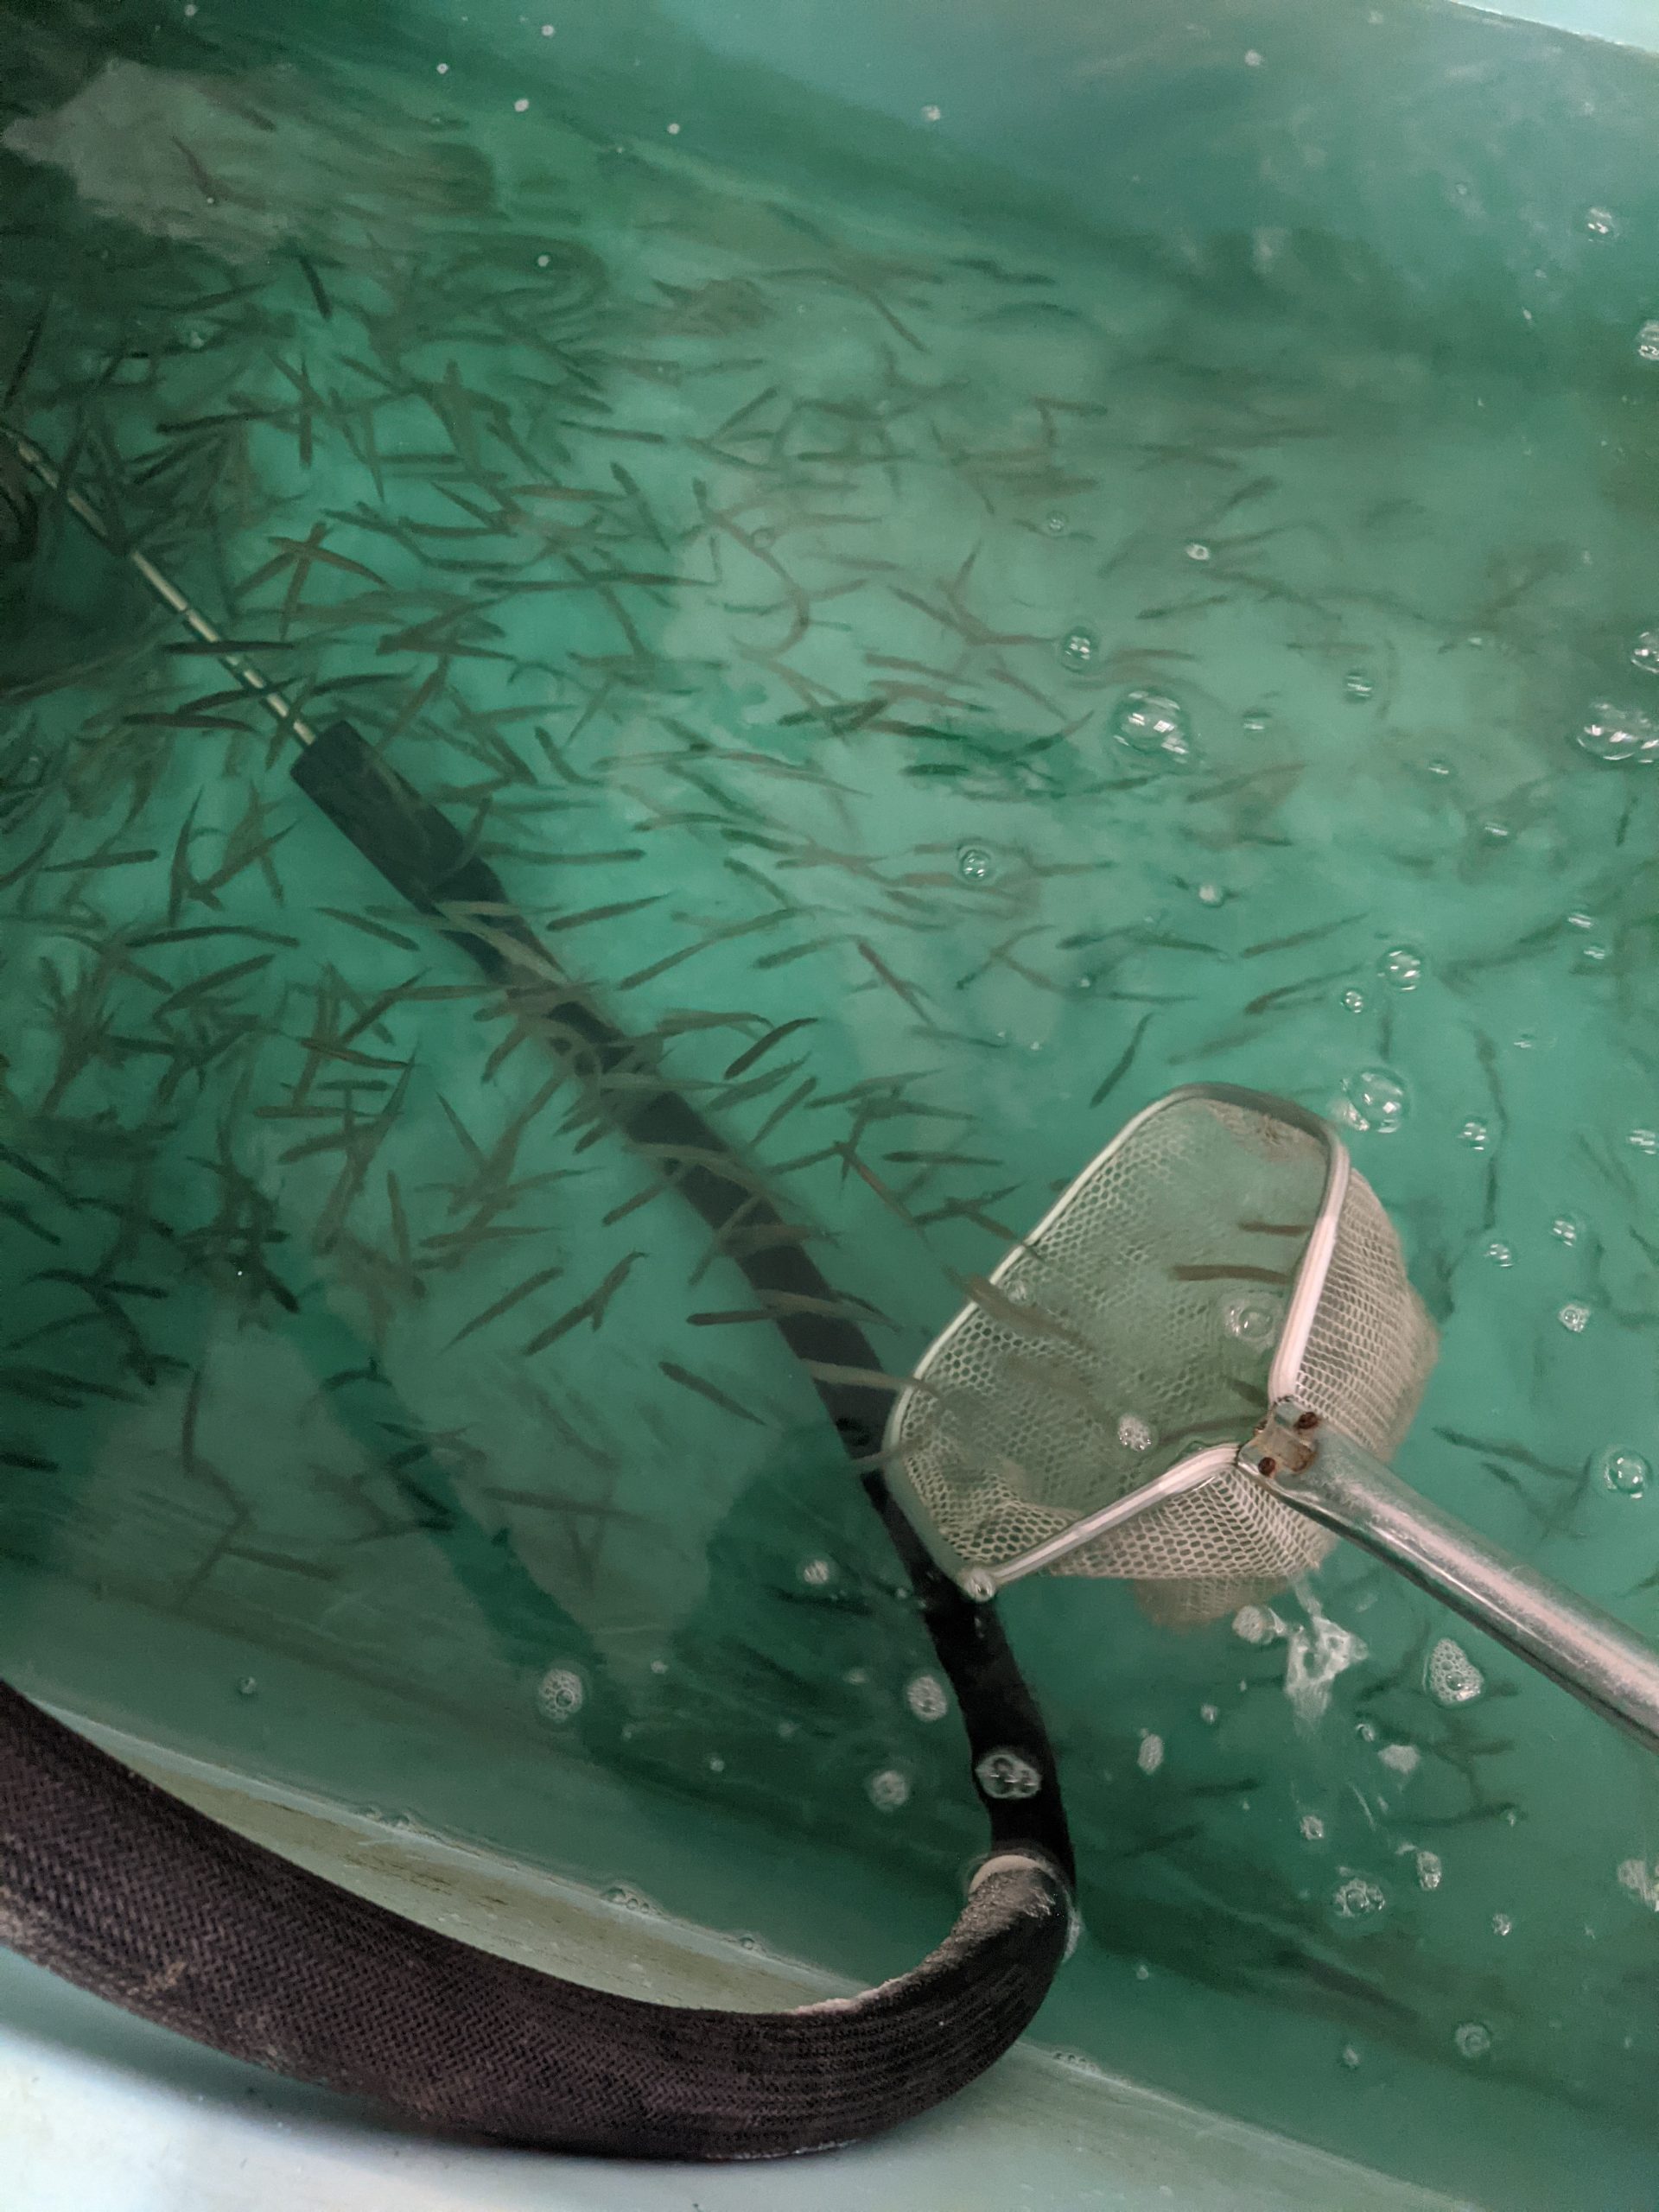 Maumee river report- 6 January 2021- Fresh Lake Erie Emerald shiners now in stock